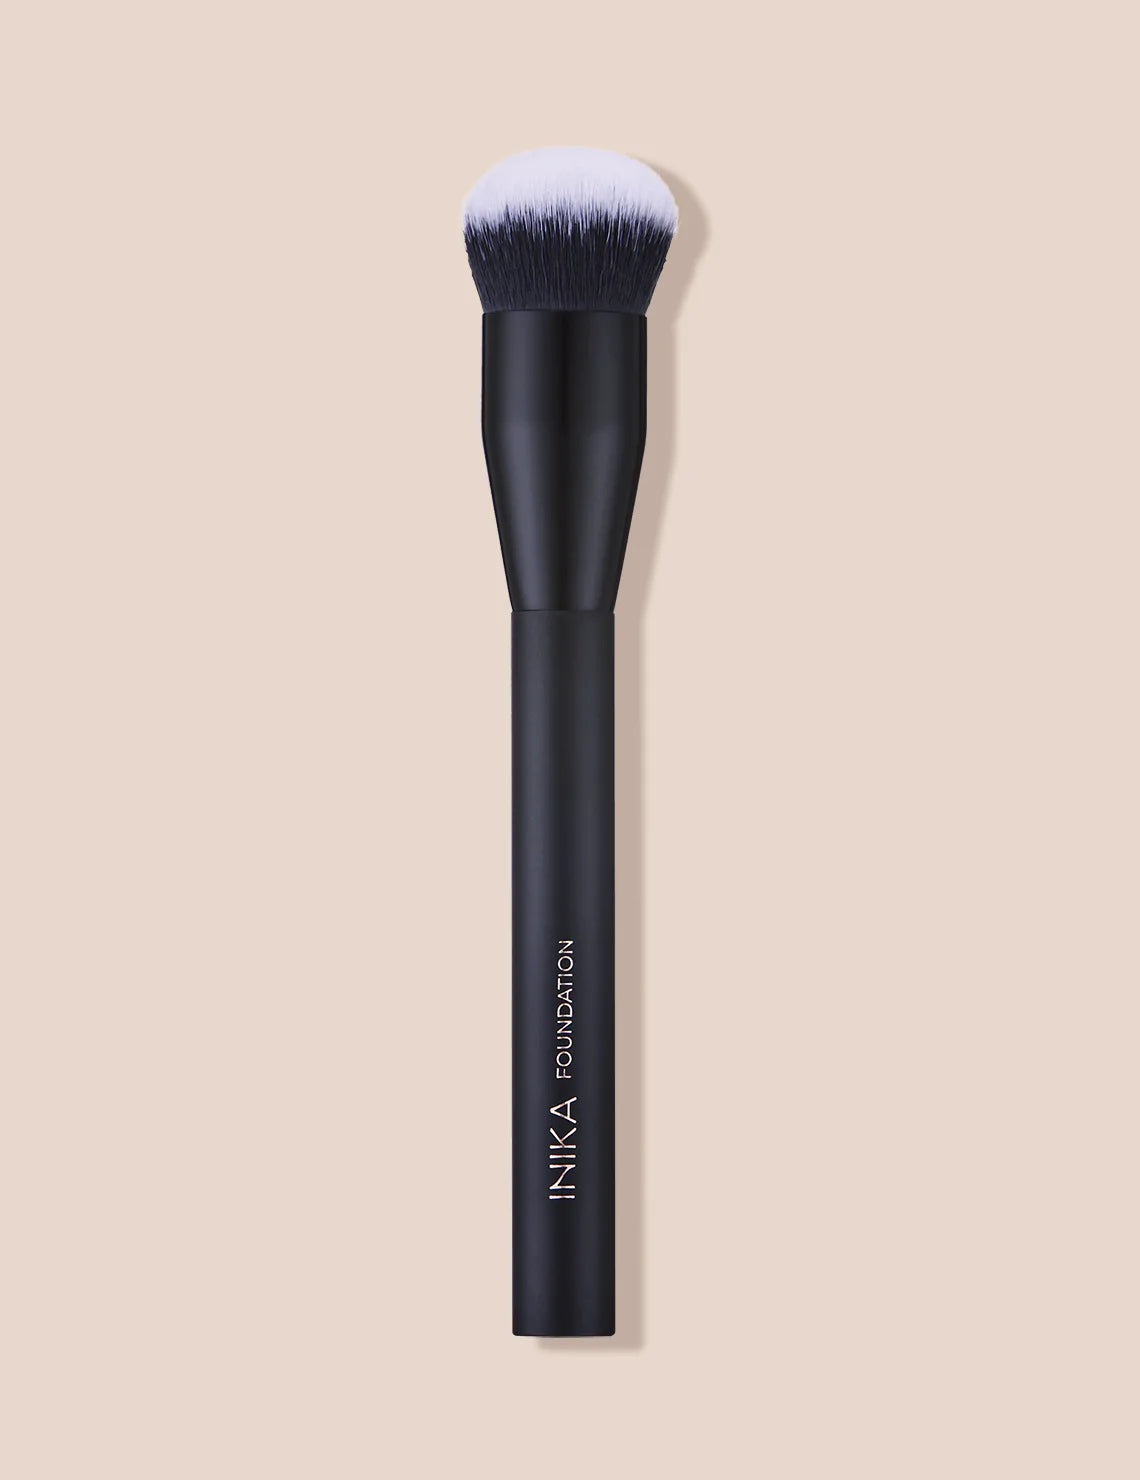 Foundation makeup brush. This makeup brush has fine, compact, soft bristles making it perfect for smooth, even foundation application. It is so soft to the touch that it feels like silk.